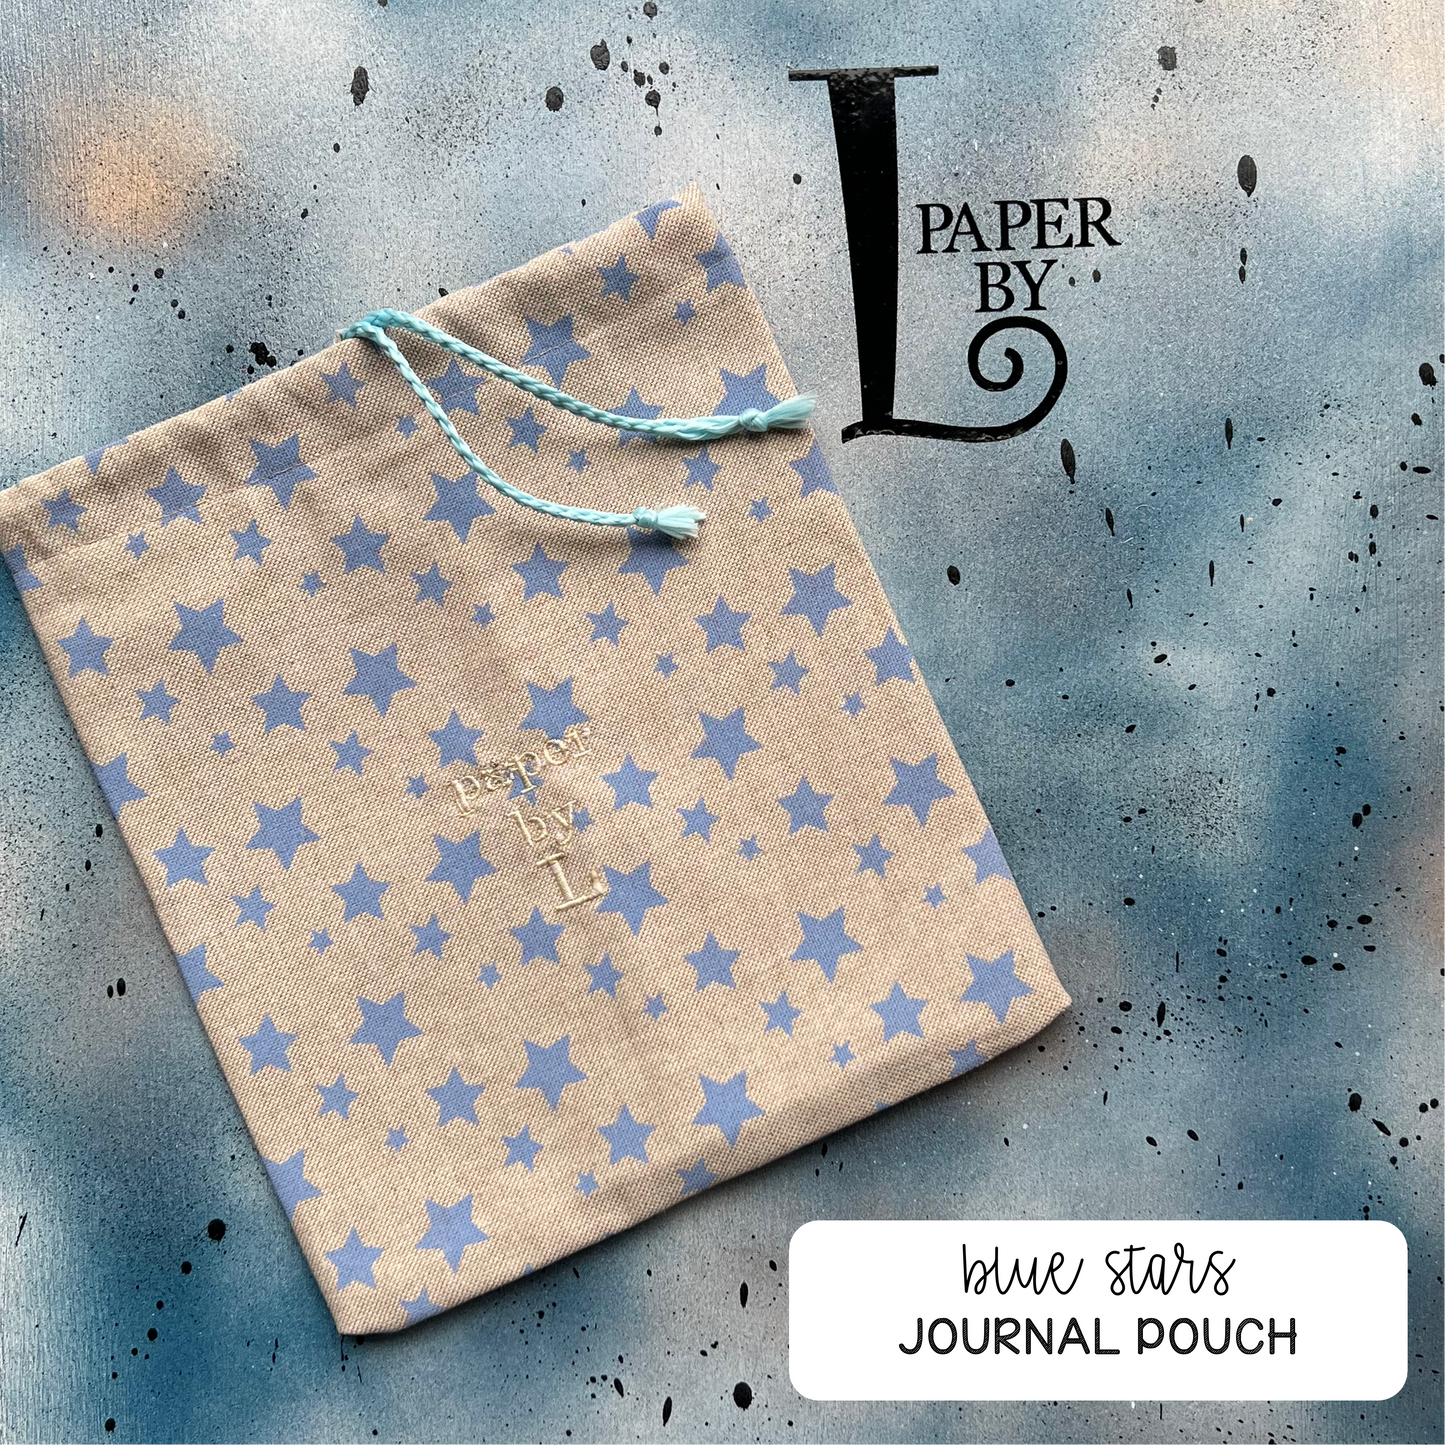 Journal Pouch - Paper by L